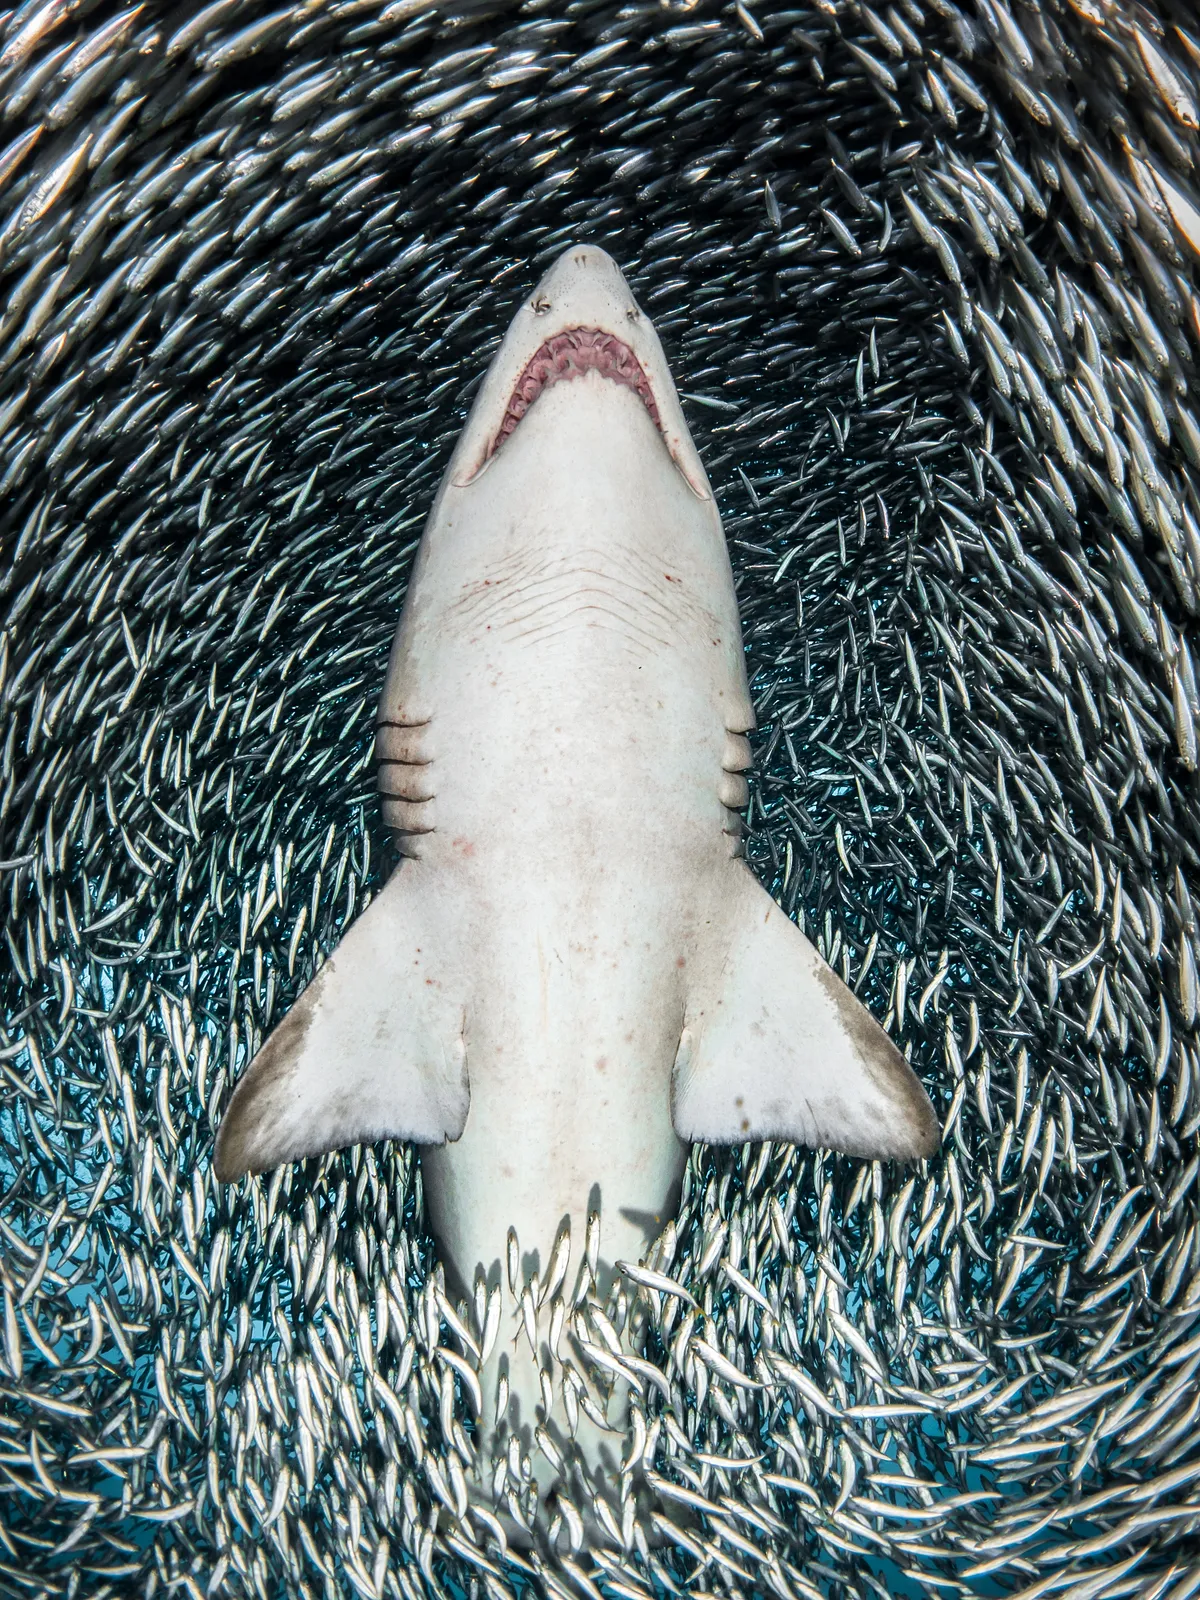 Portrait Category Winner. A sand tiger shark surrounded by tiny bait fish. © Tanya Houppermans/UPY 2018.